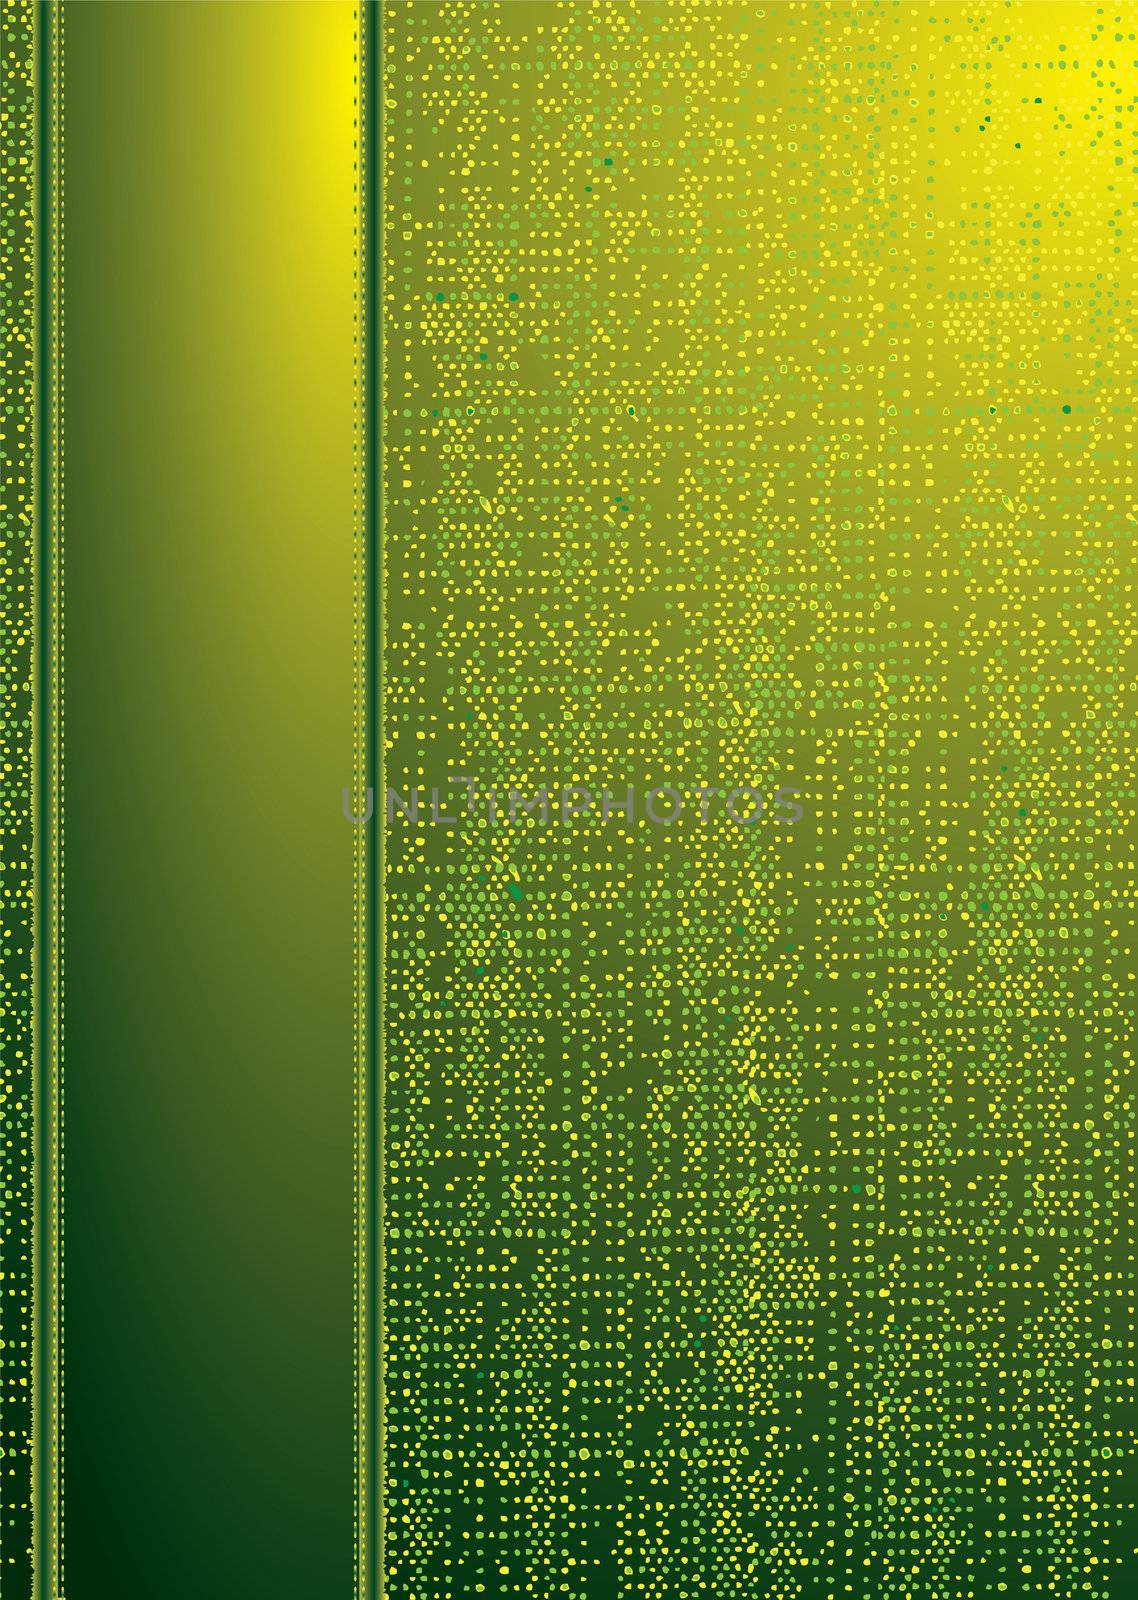 green and yellow abstarct background with room to add copy